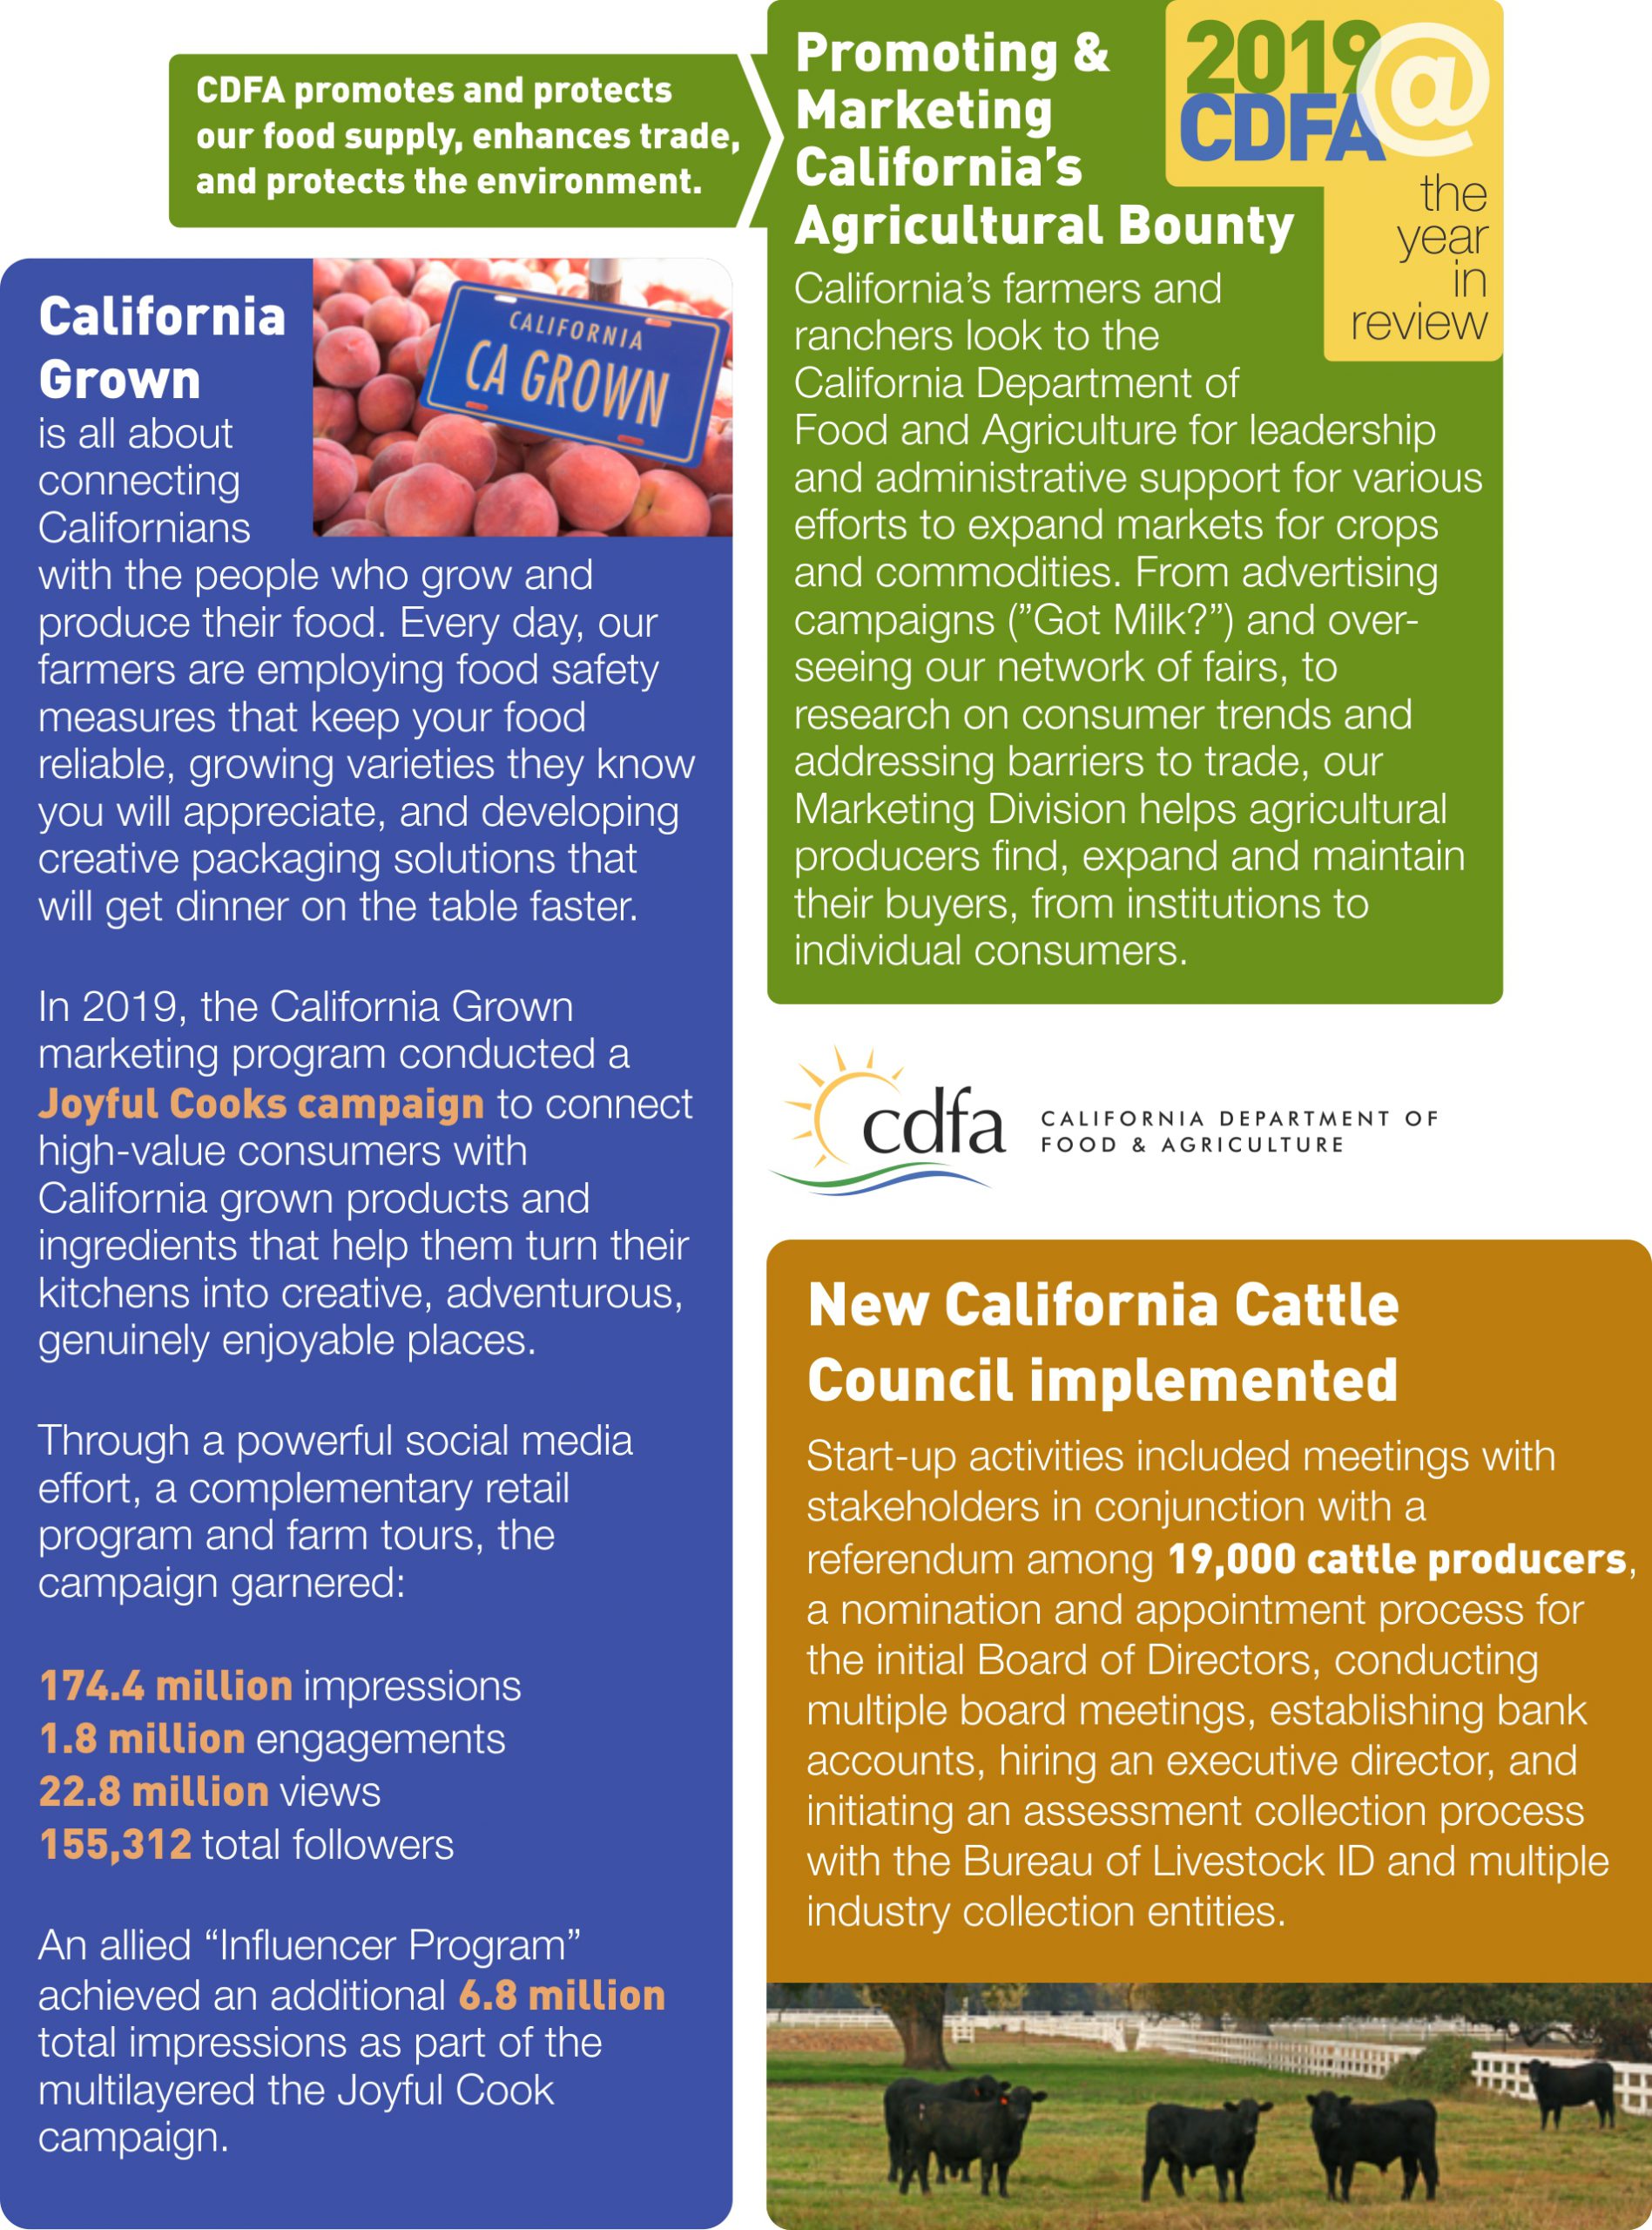 Infographic with details about CDFA's California Grown marketing program and the new California Cattle Council implemented in 2019